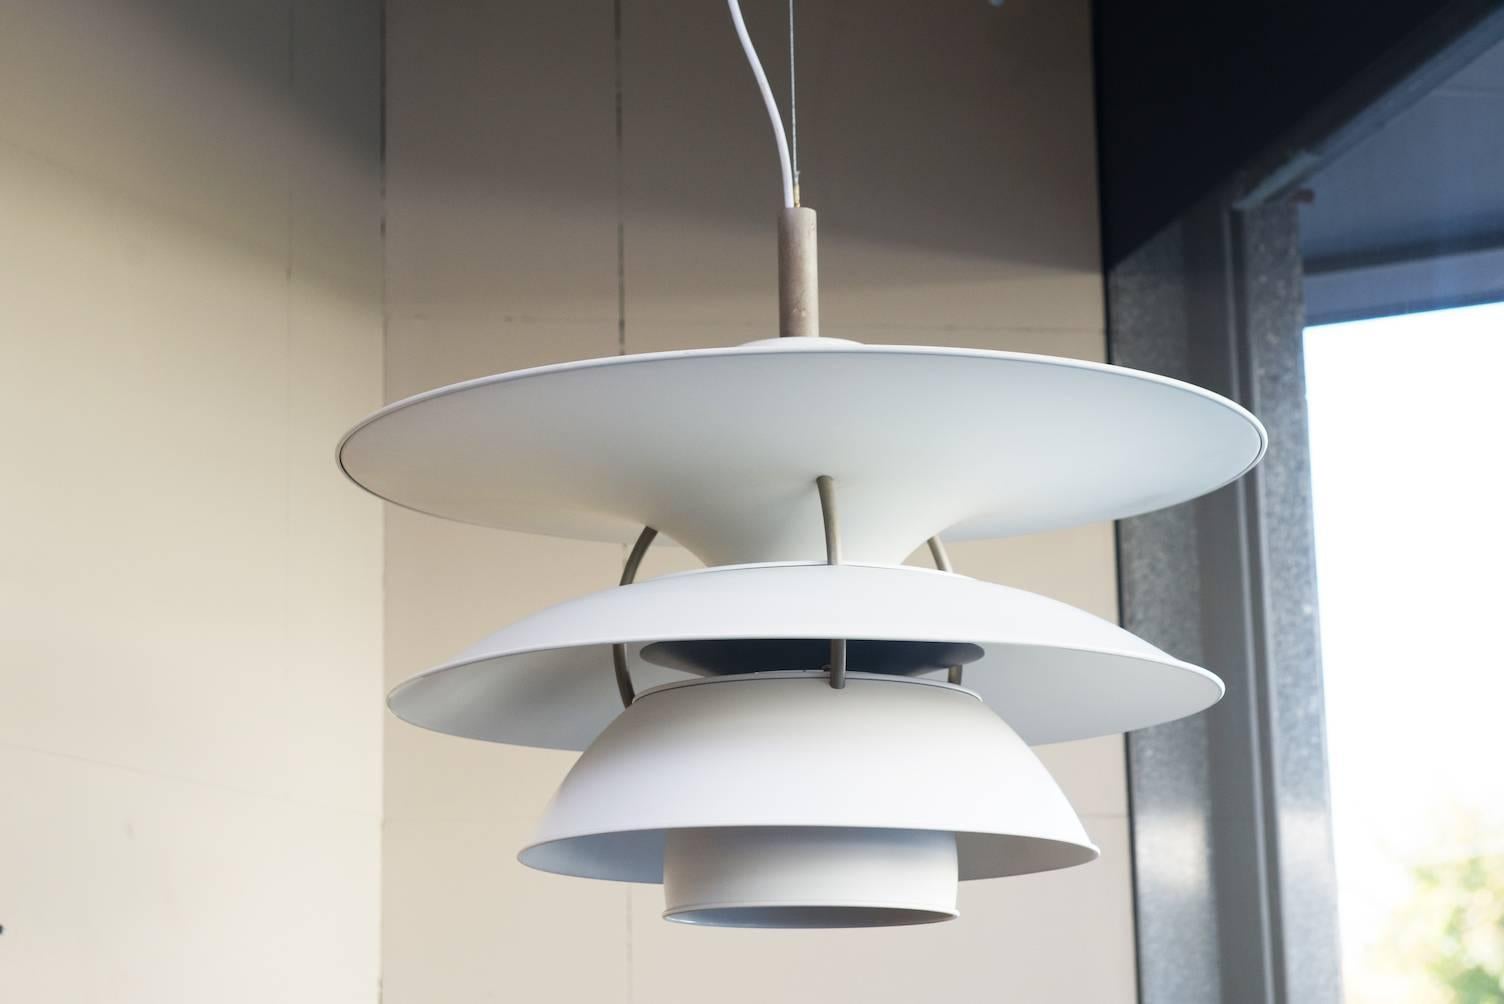 Large pendant lamp Charlottenborg, white and blue lacquered metal.
Producer: Louis Poulsen.